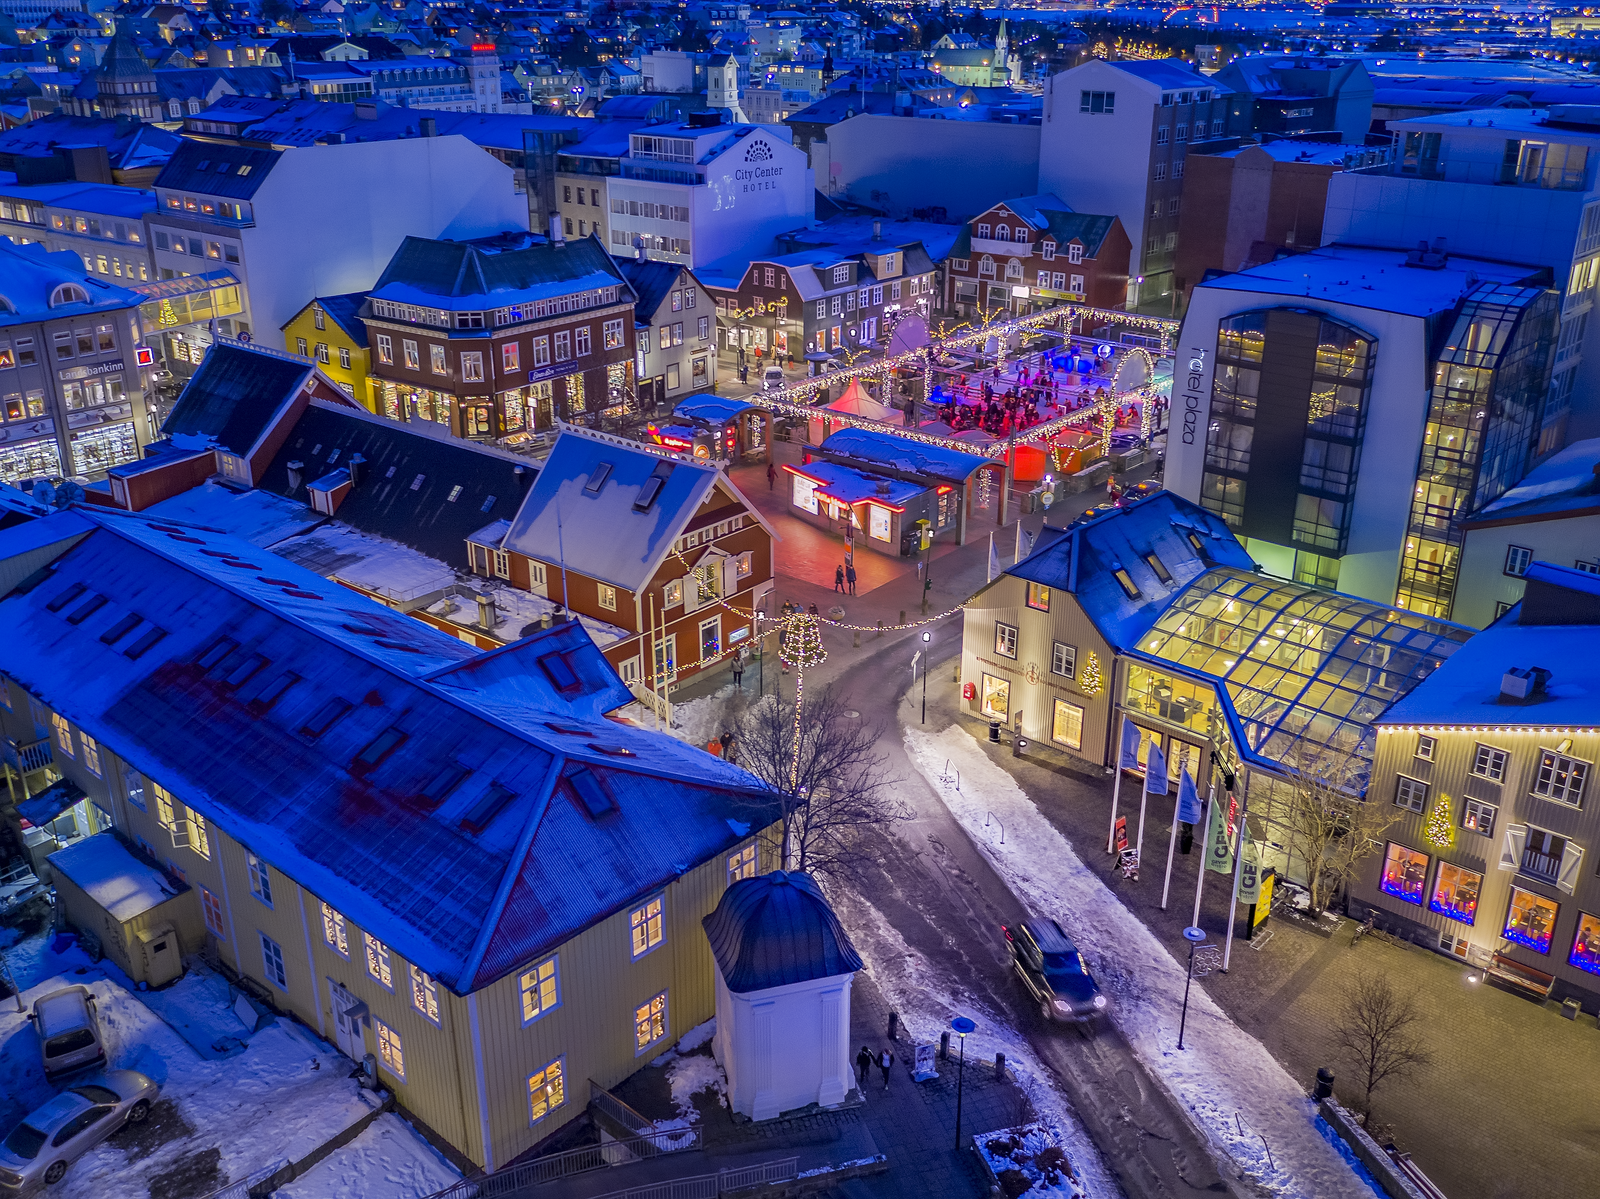 Downtown Reykjavik decorated with Christmas lights